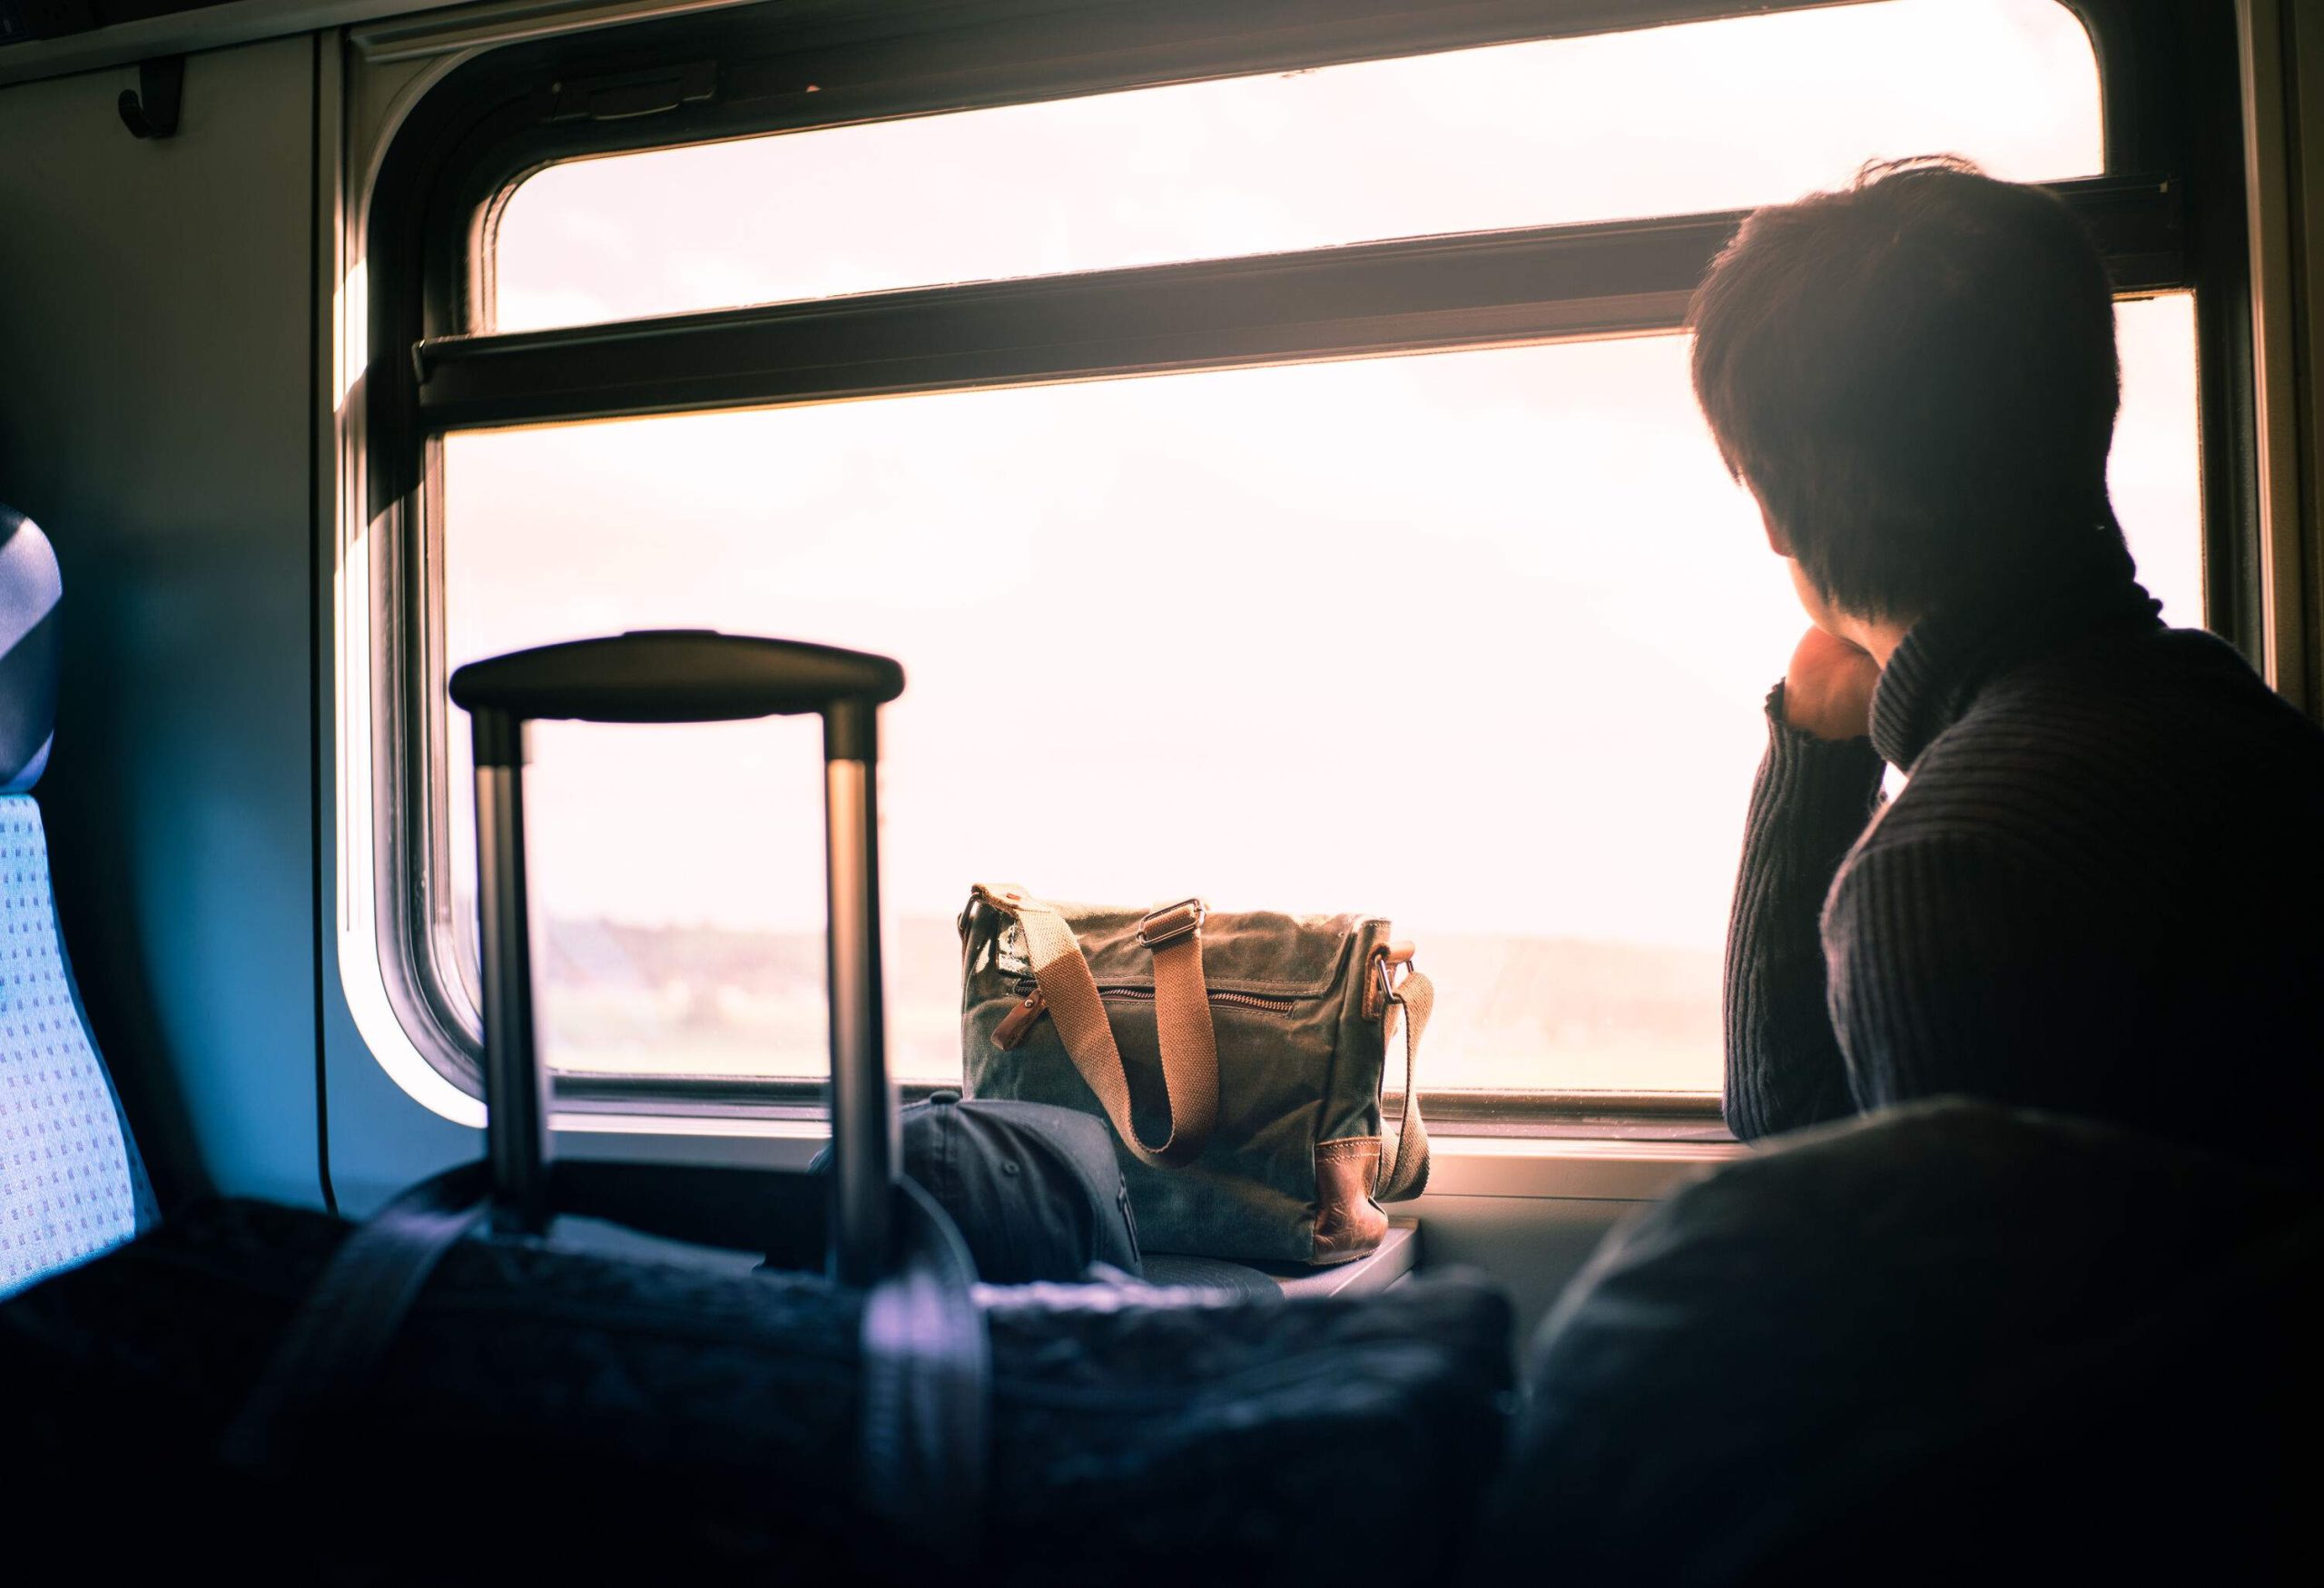 A male traveller rides the train with his luggage and looks through the window.